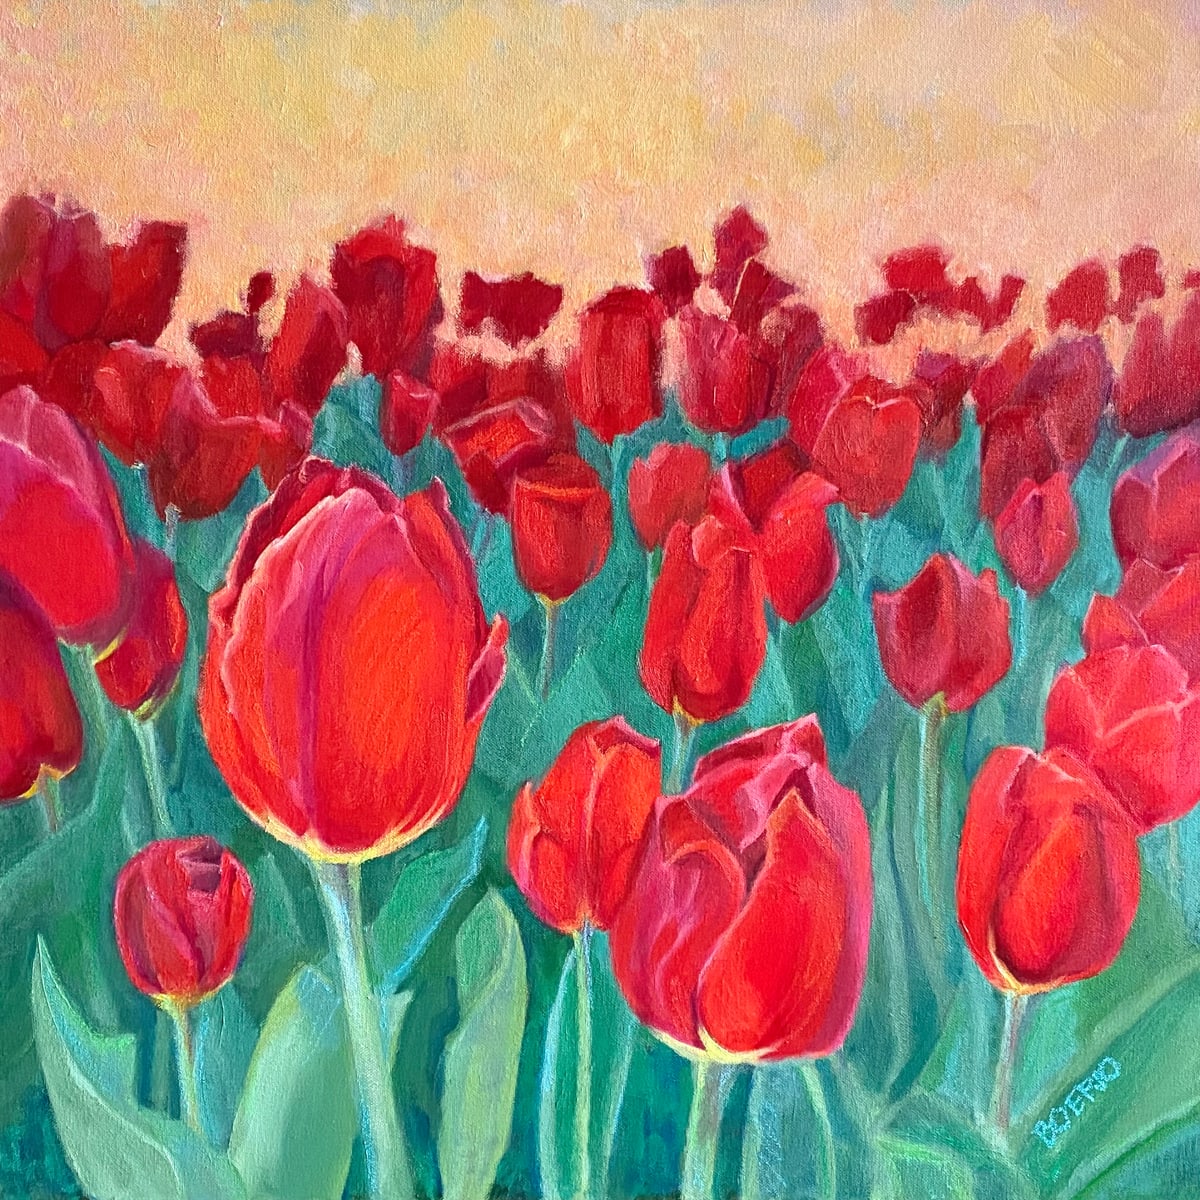 Abundance (24 x 24 inches) by Carrie Lacey Boerio  Image: Original oil painting of a field of red tulips by Carrie Lacey Boerio